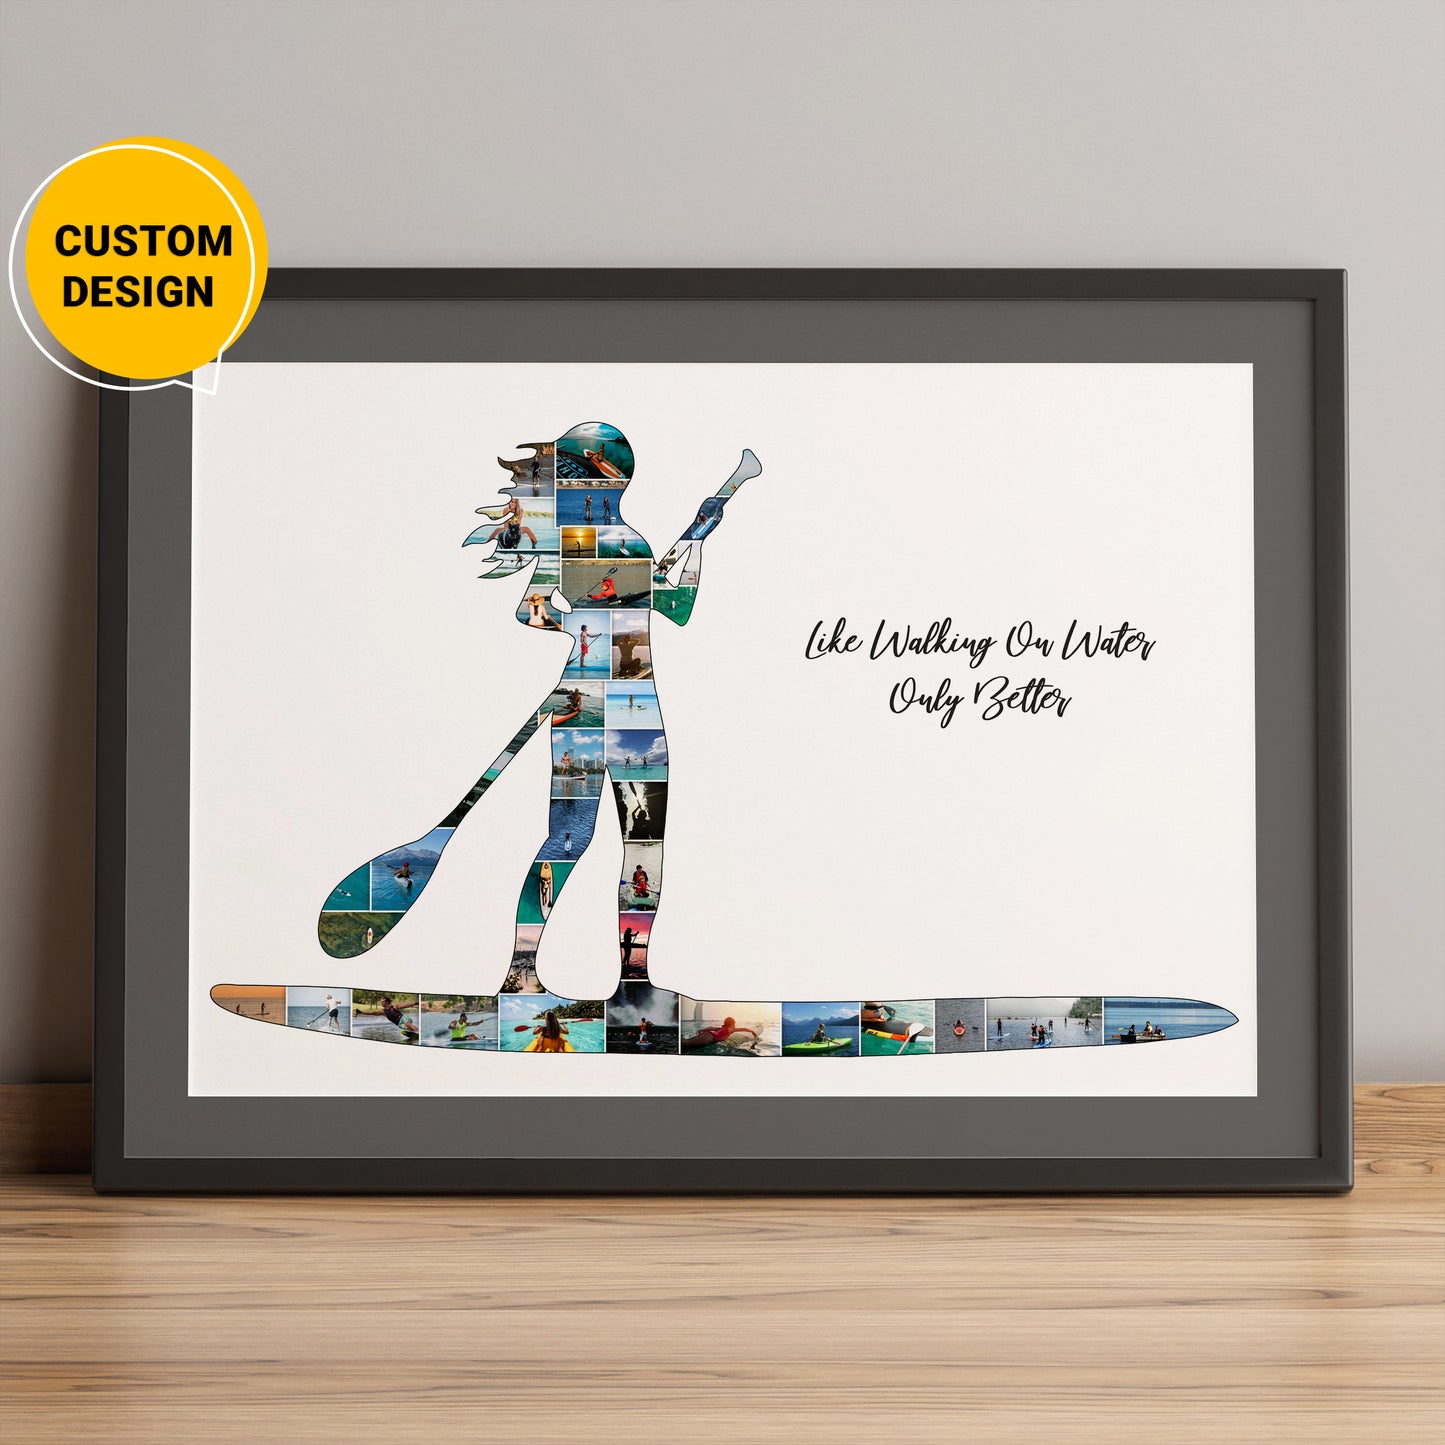 Customizable Personalized Photo Collage - Cool Scuba Diving Gifts for Him and Her"